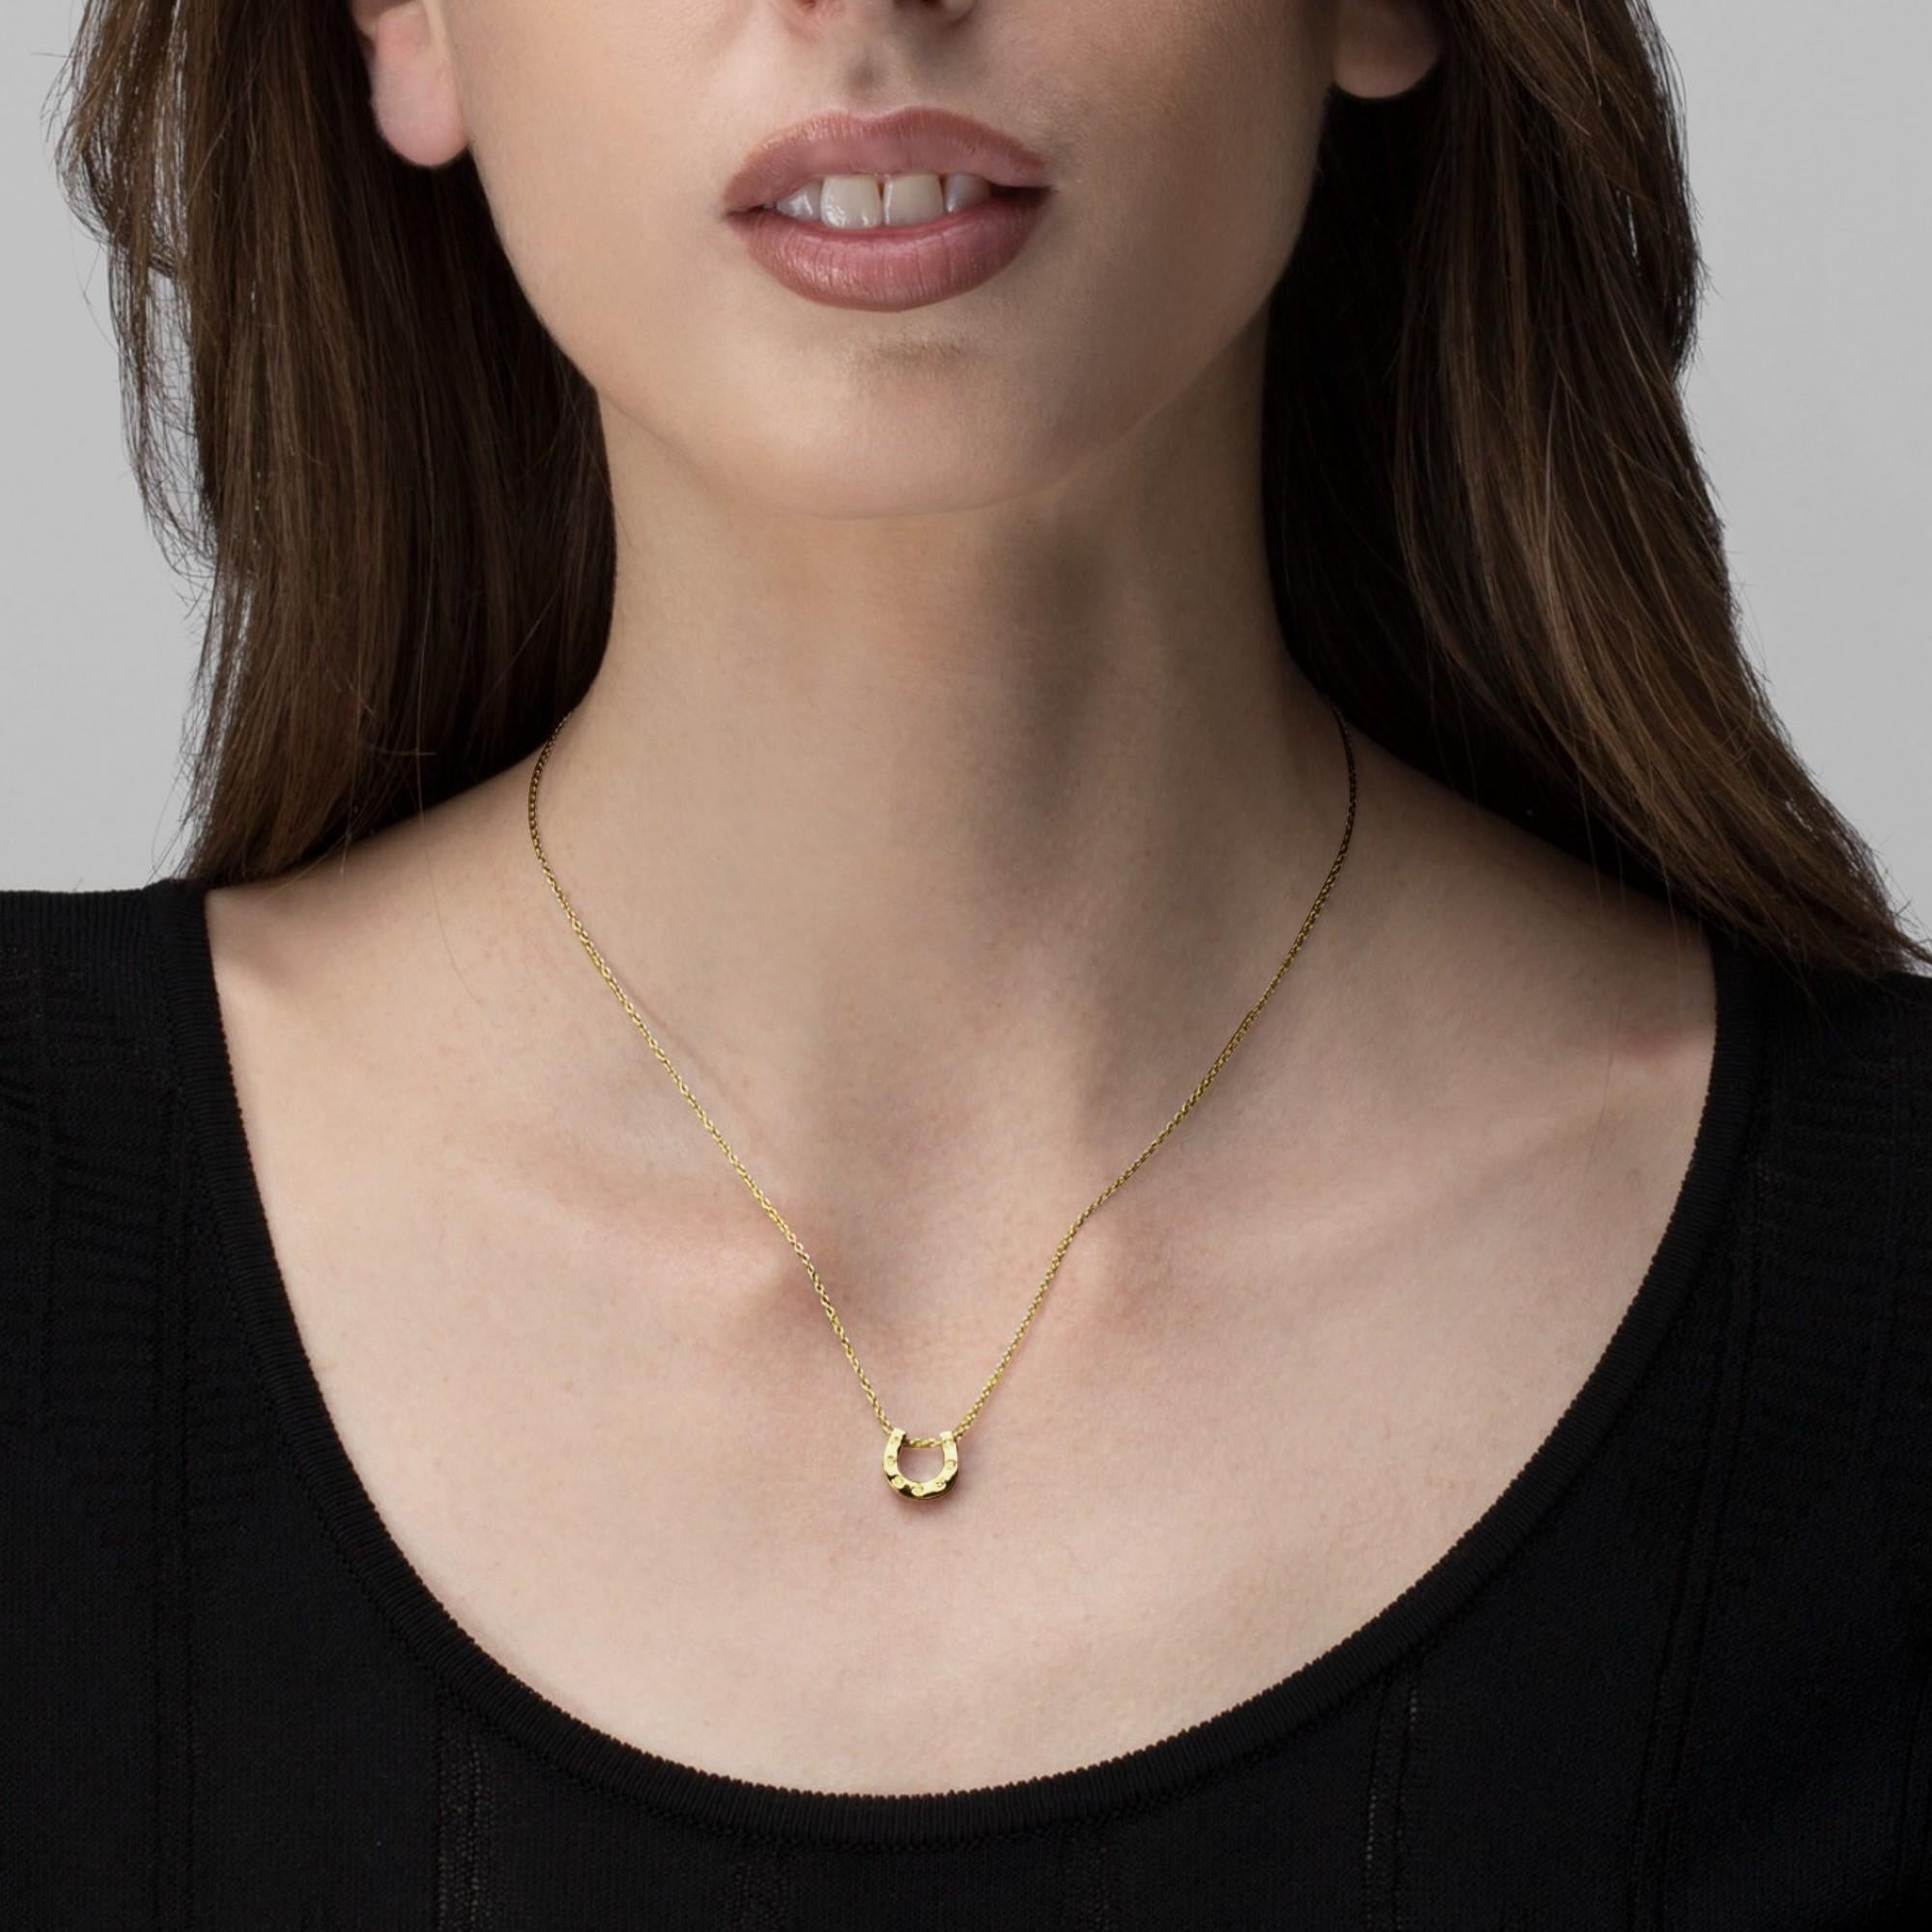 Alex Jona design collection, hand crafted in Italy, 18 carat yellow gold horseshoe  pendant, sliding on a 17.7 in/45 cm chain necklace. A further small ring allows to reduce the length of the chain to 16.5 in./42 cm. Marked Jona.Dimensions:0.42 in.